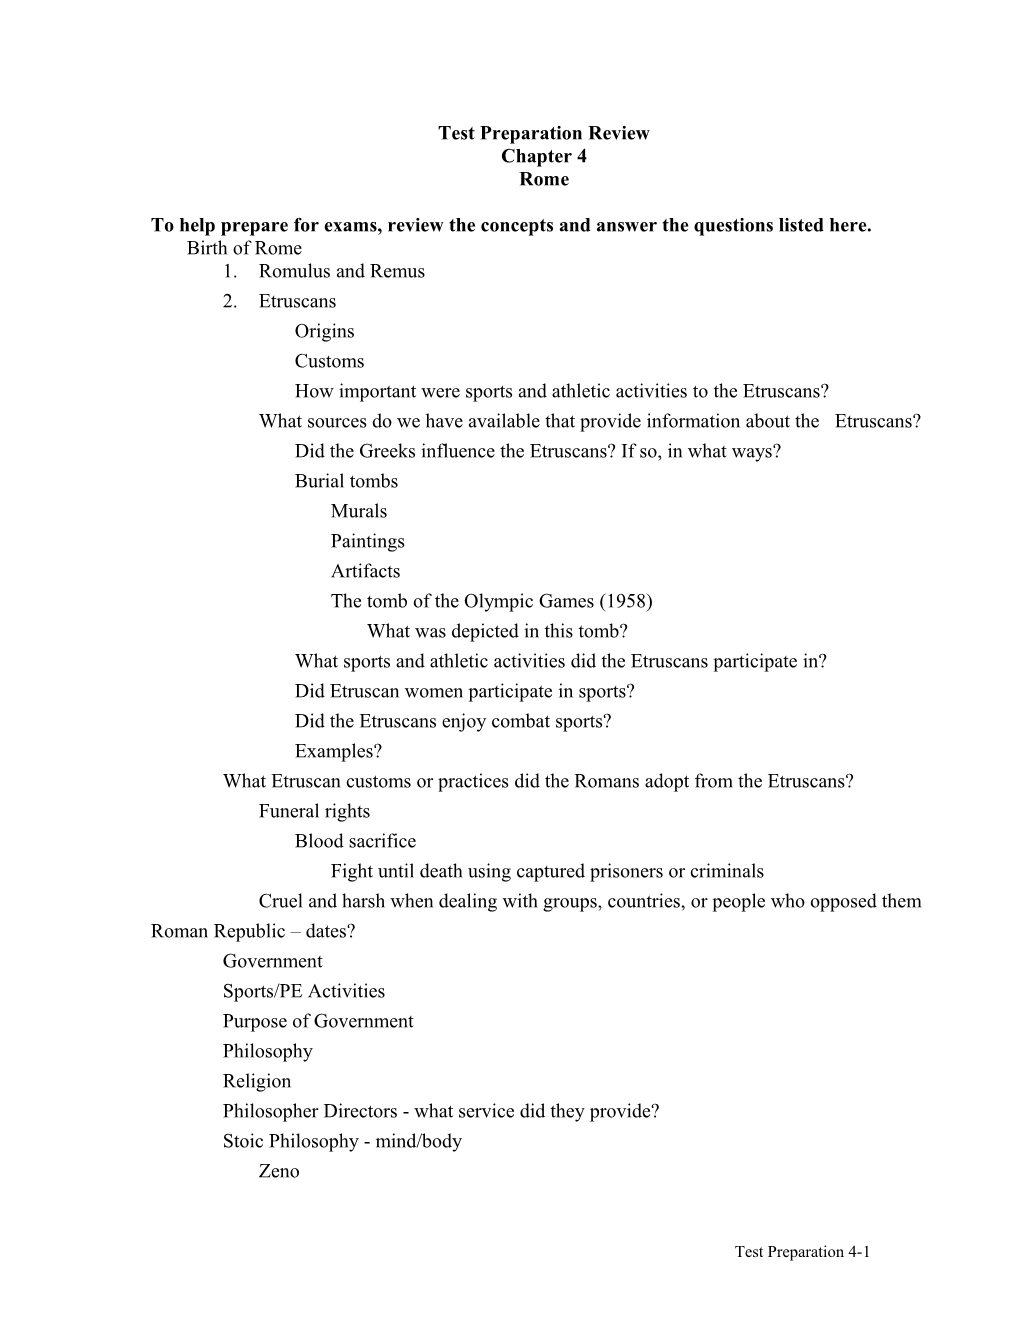 Chapter 4 Study Guide s3